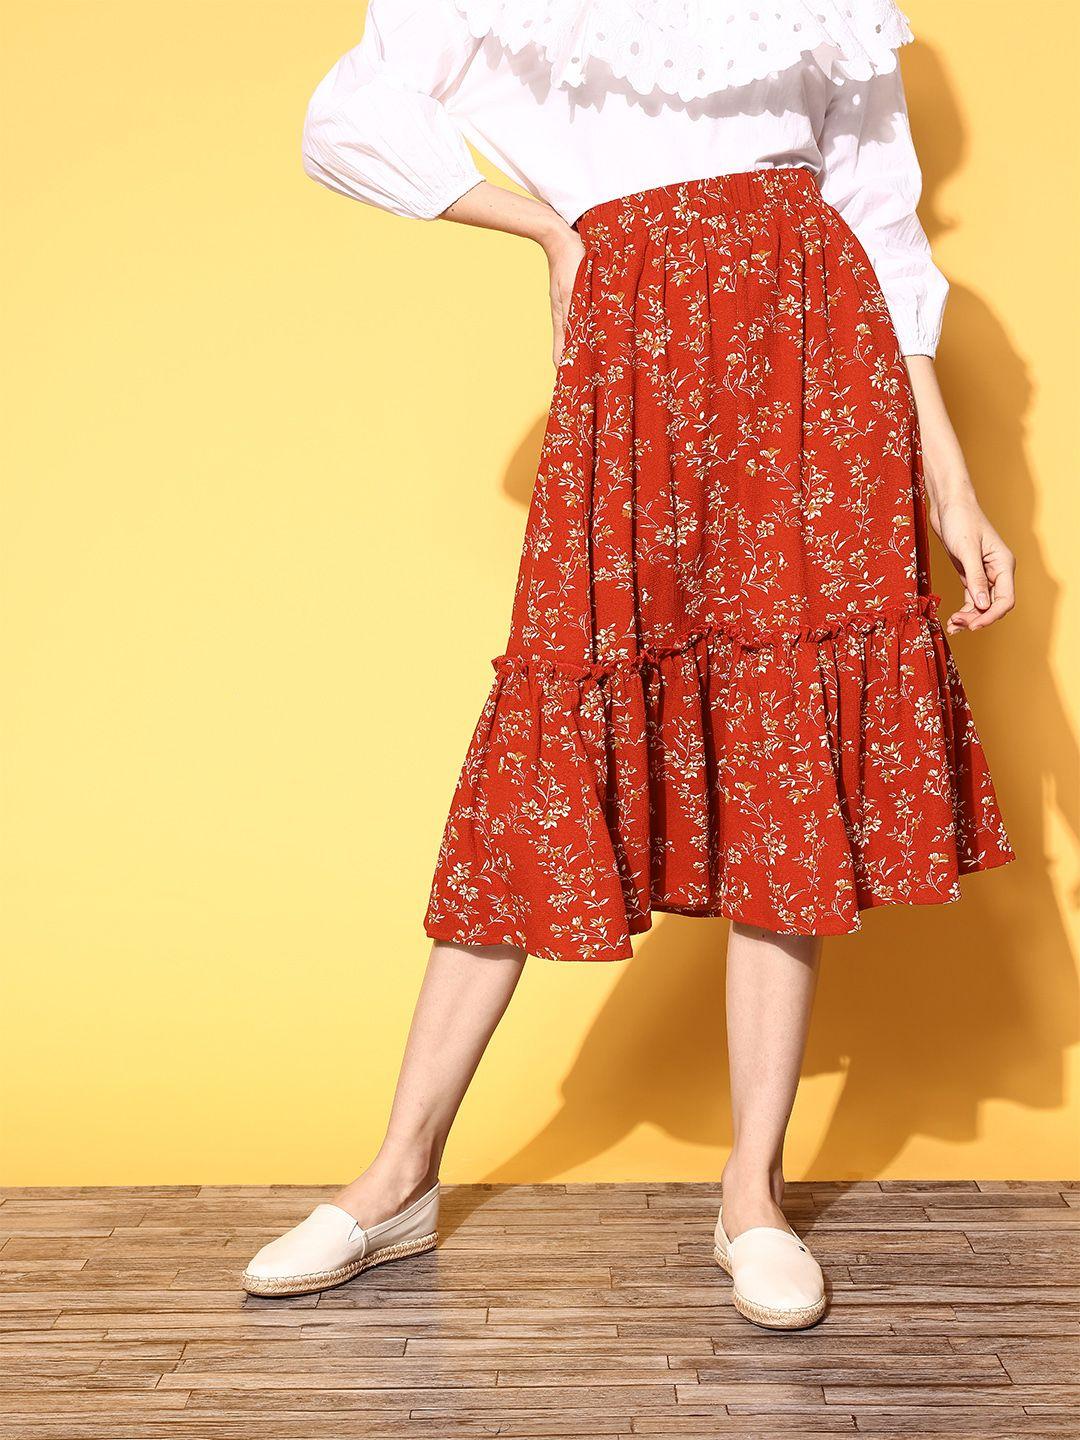 berrylush attractive red floral indie gal skirt